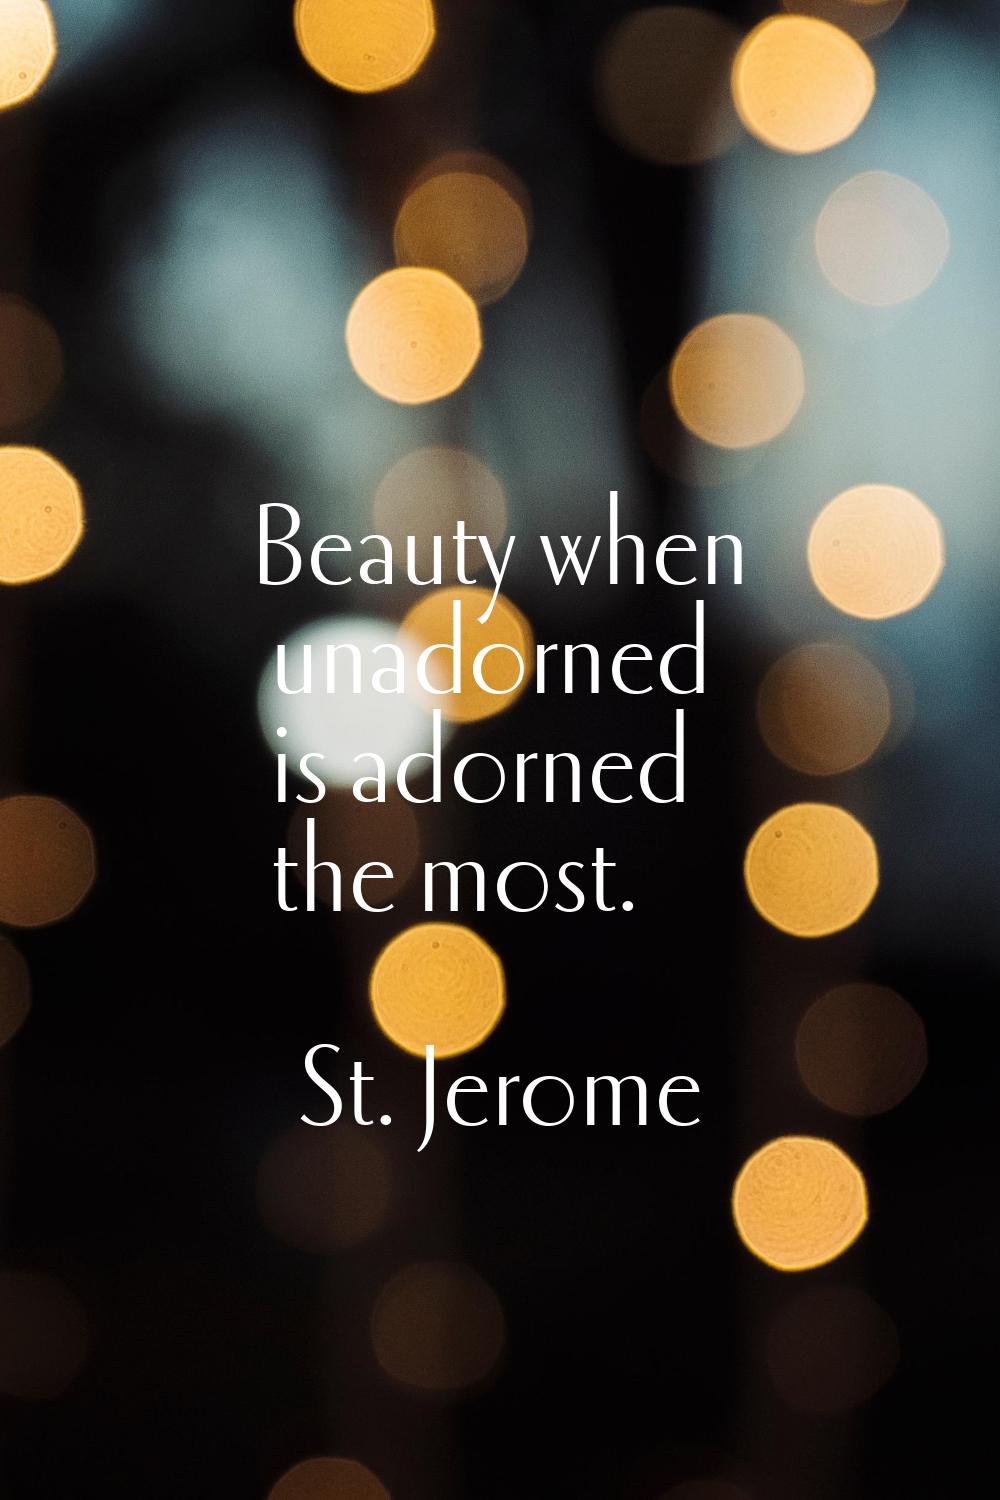 Beauty when unadorned is adorned the most.